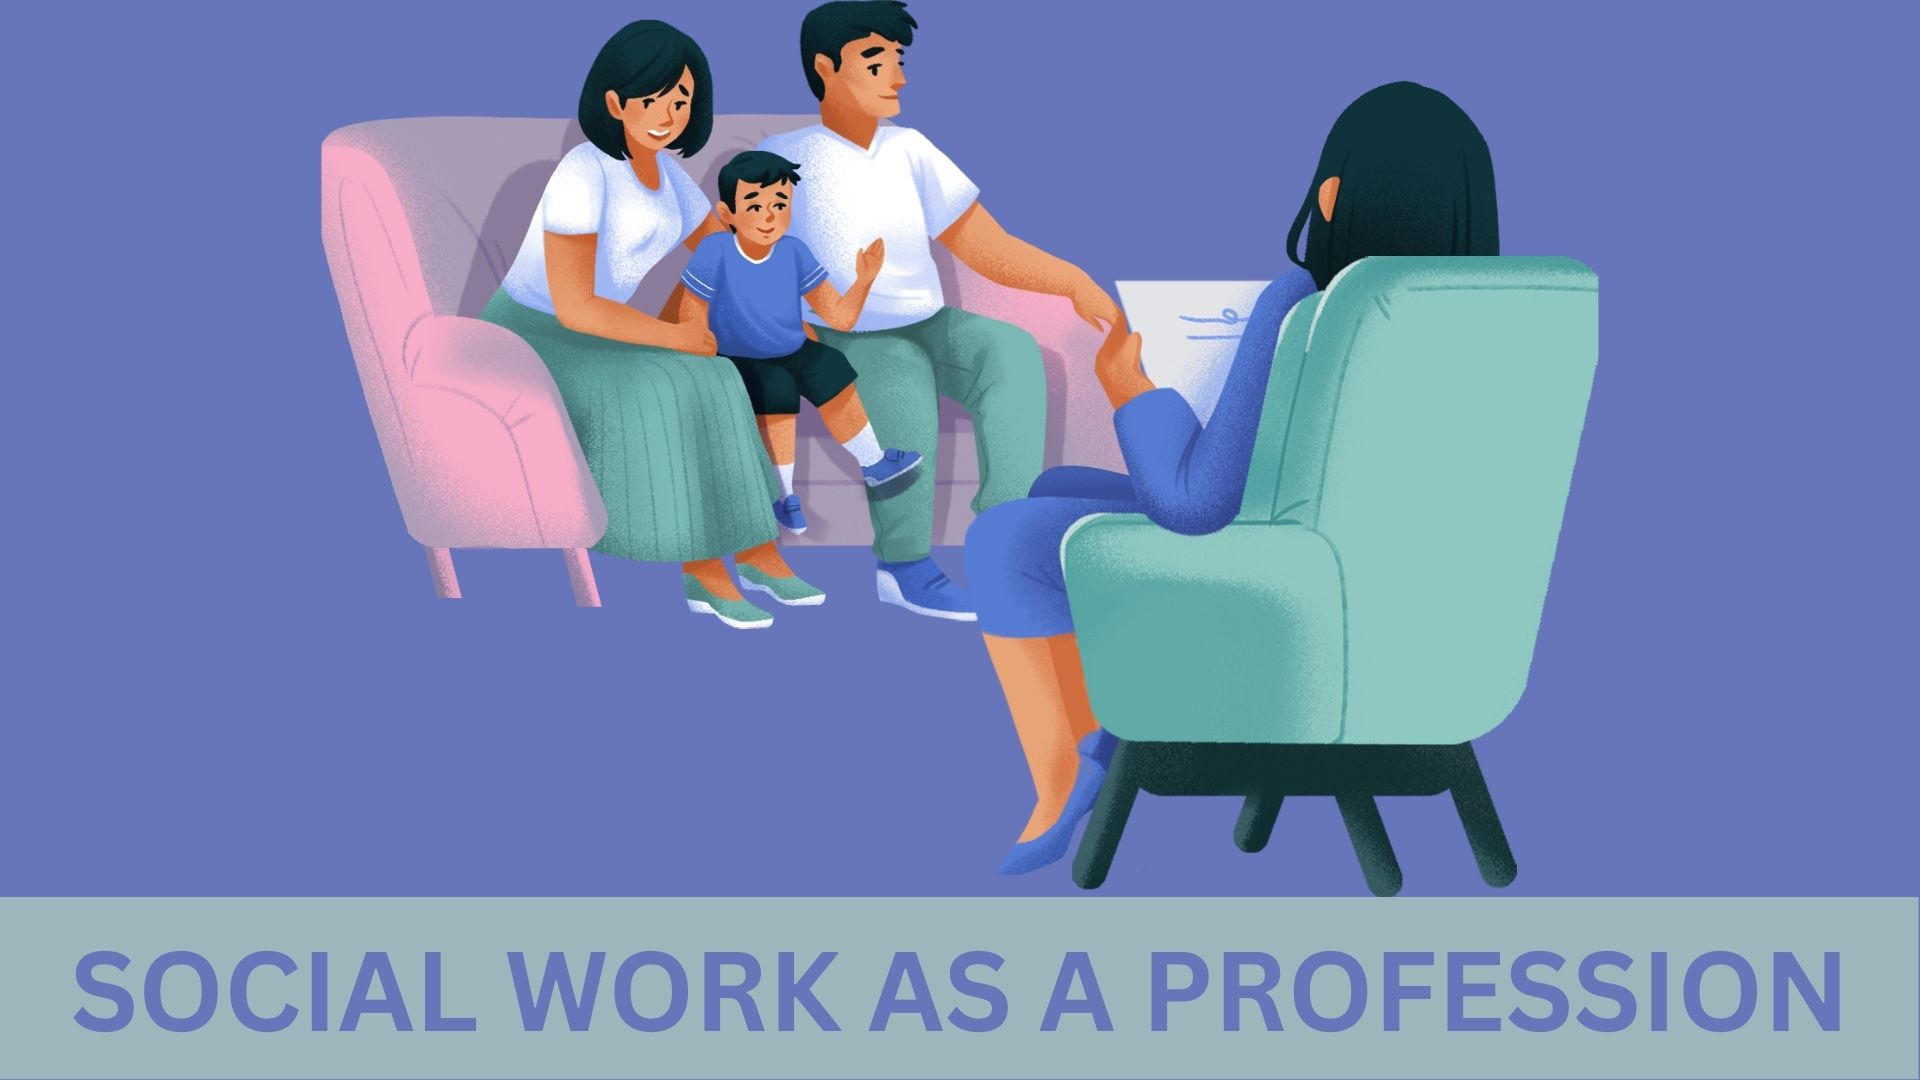 Social Work As a Profession